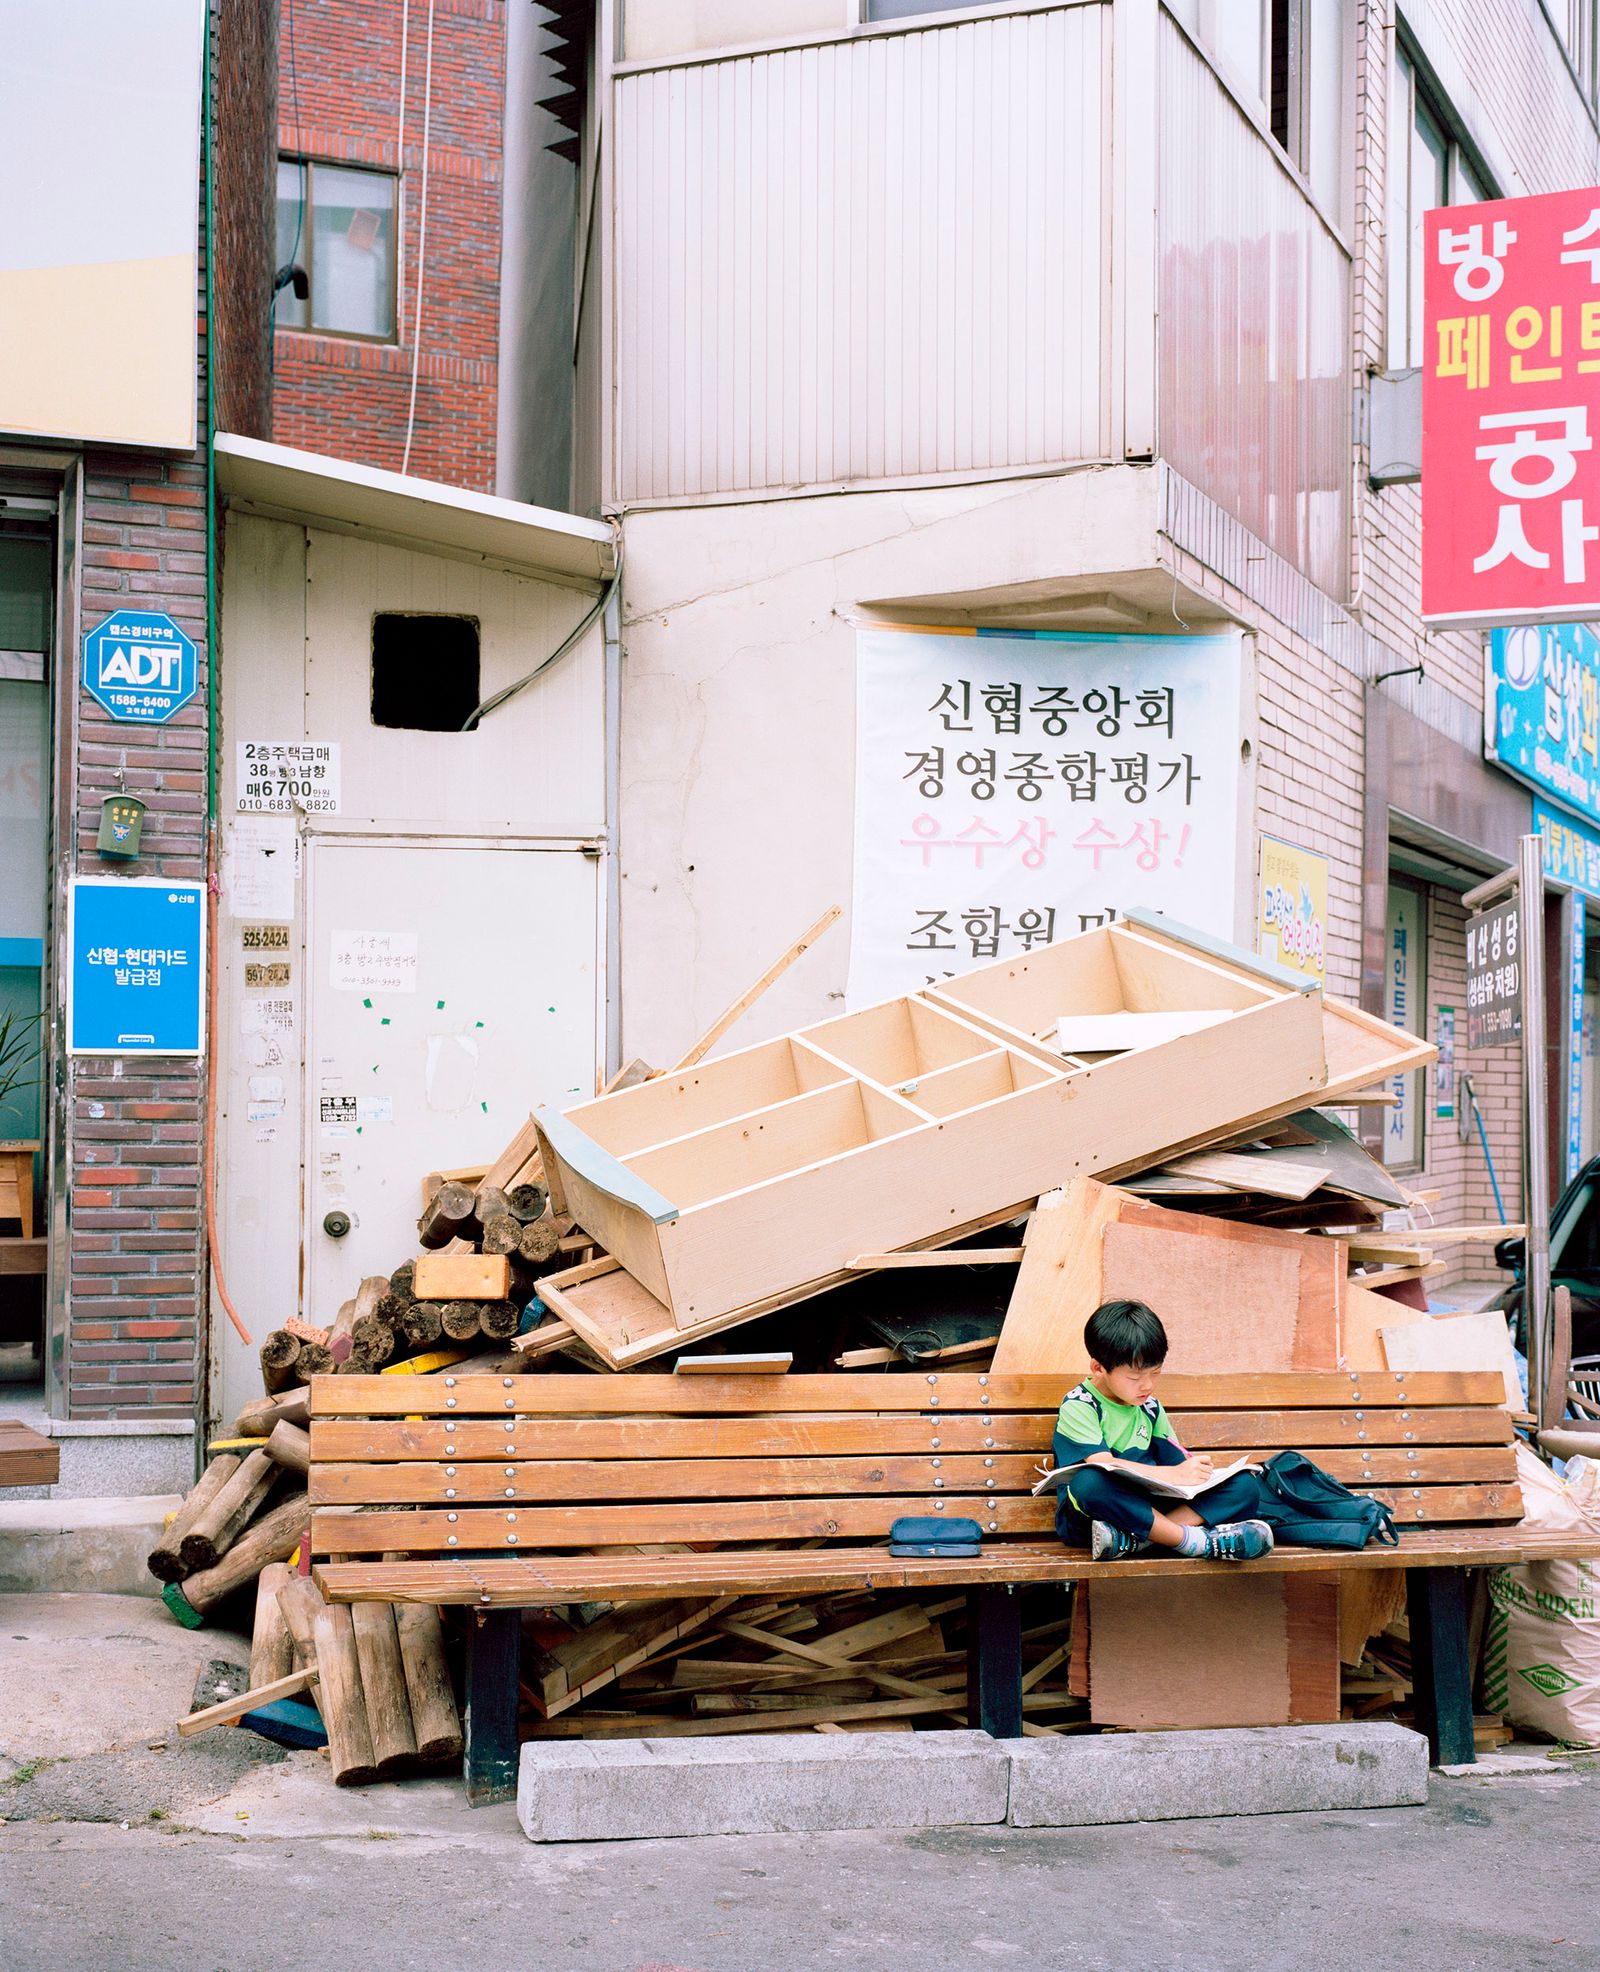 © Florian Bong-kil Grosse - Image from the Hanguk photography project